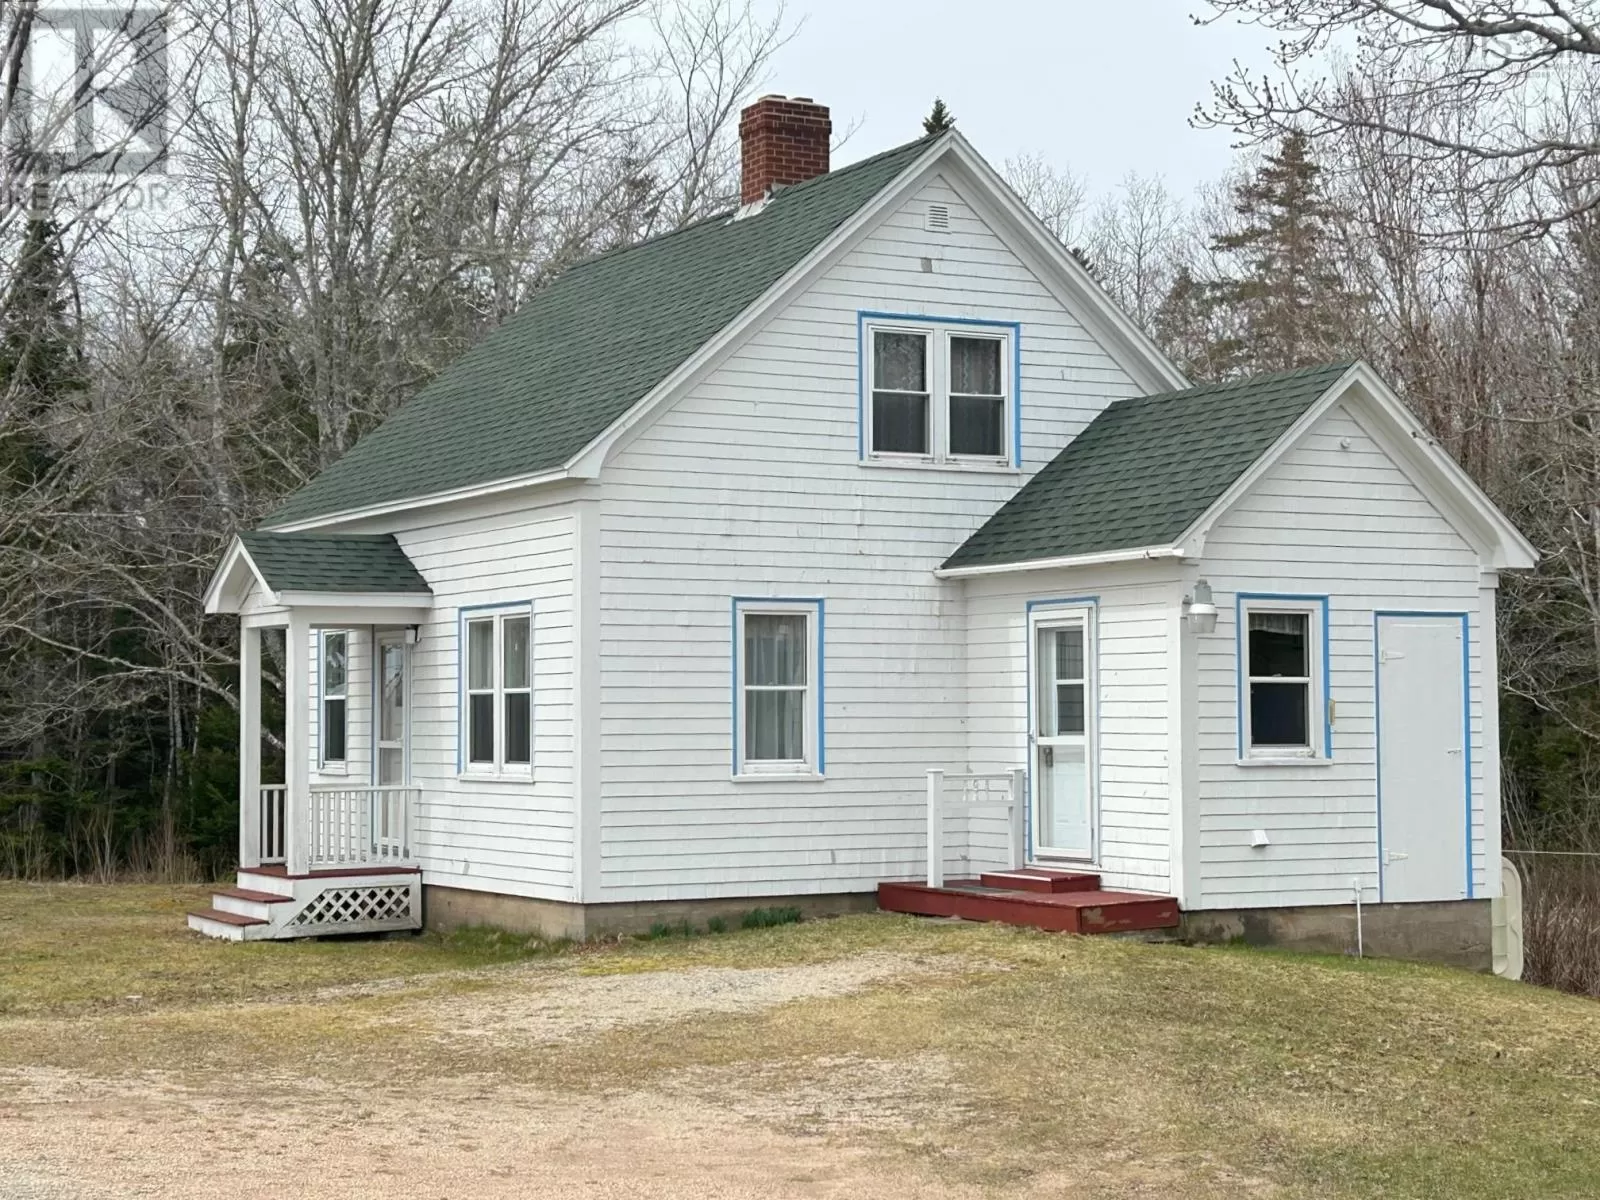 House for rent: 643 New Russell Road, New Russell, Nova Scotia B0J 2M0